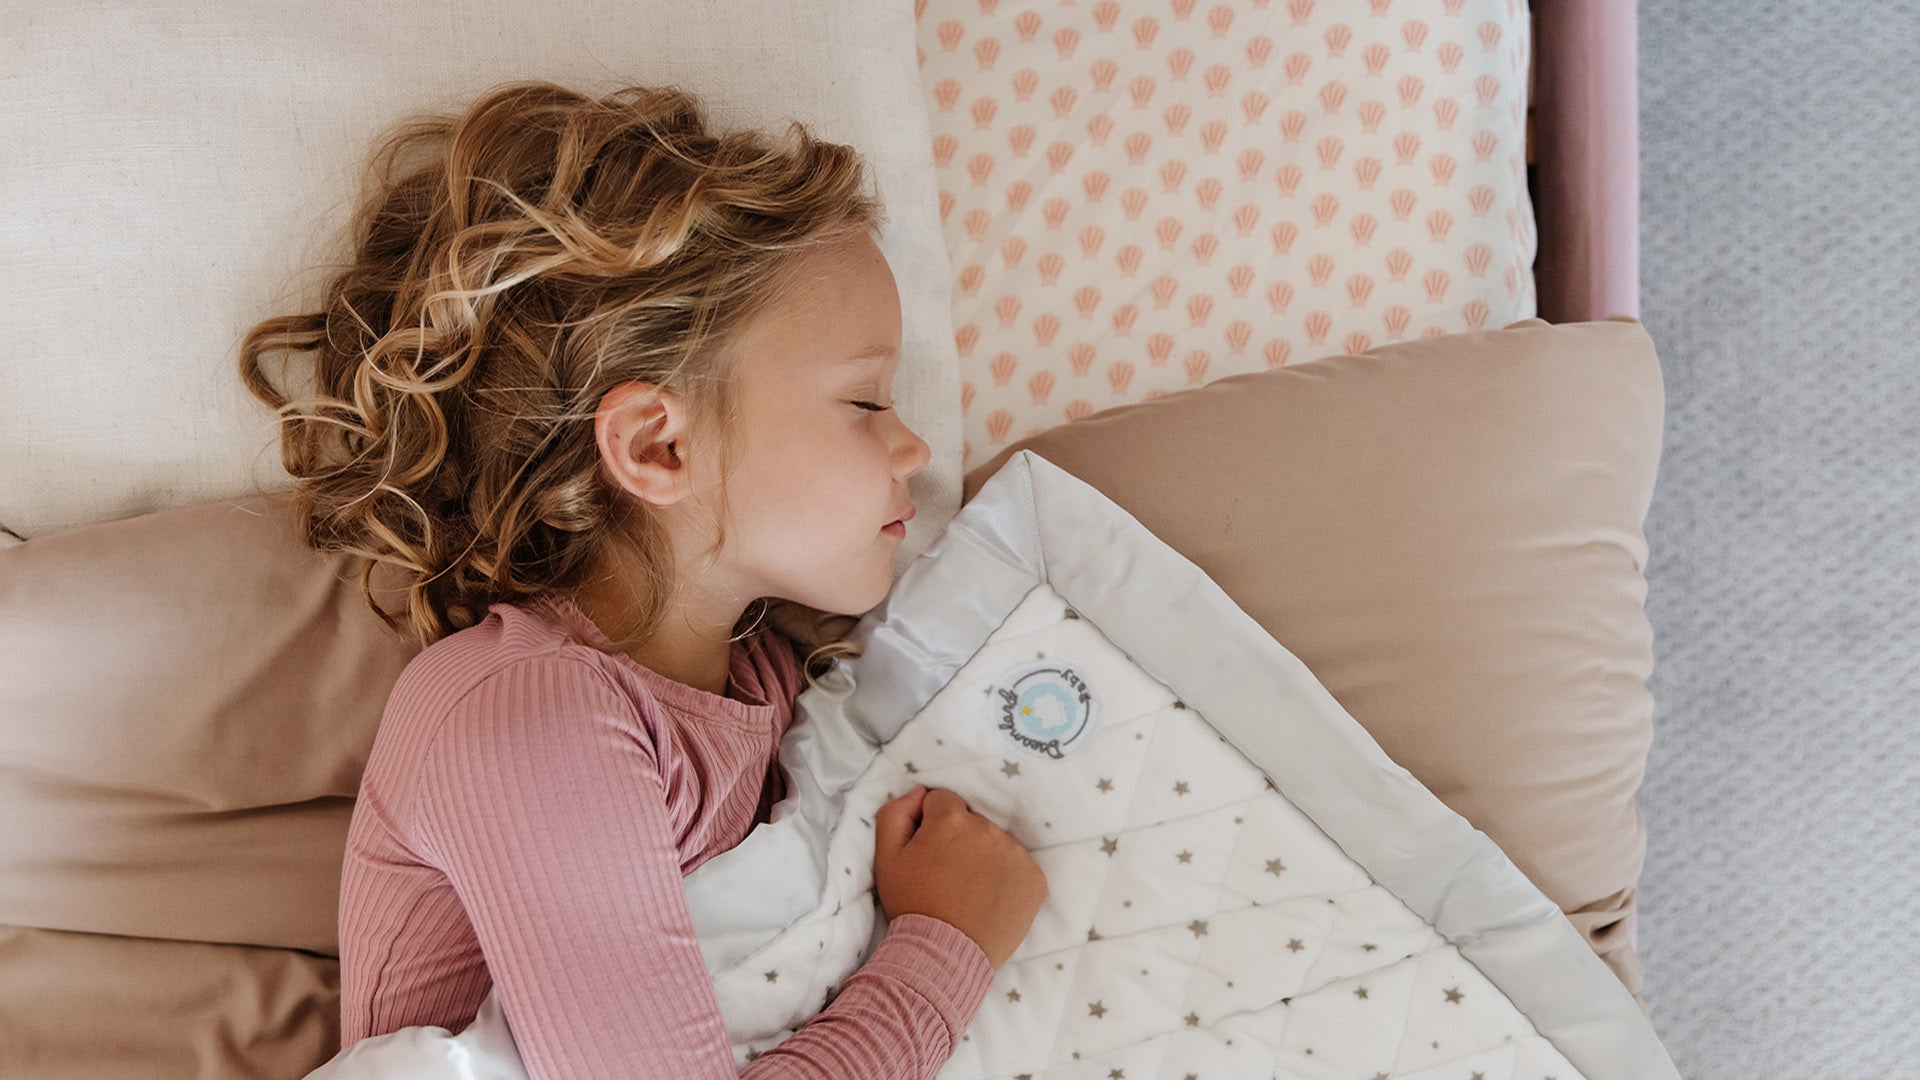 What Size Is Toddler Bedding?